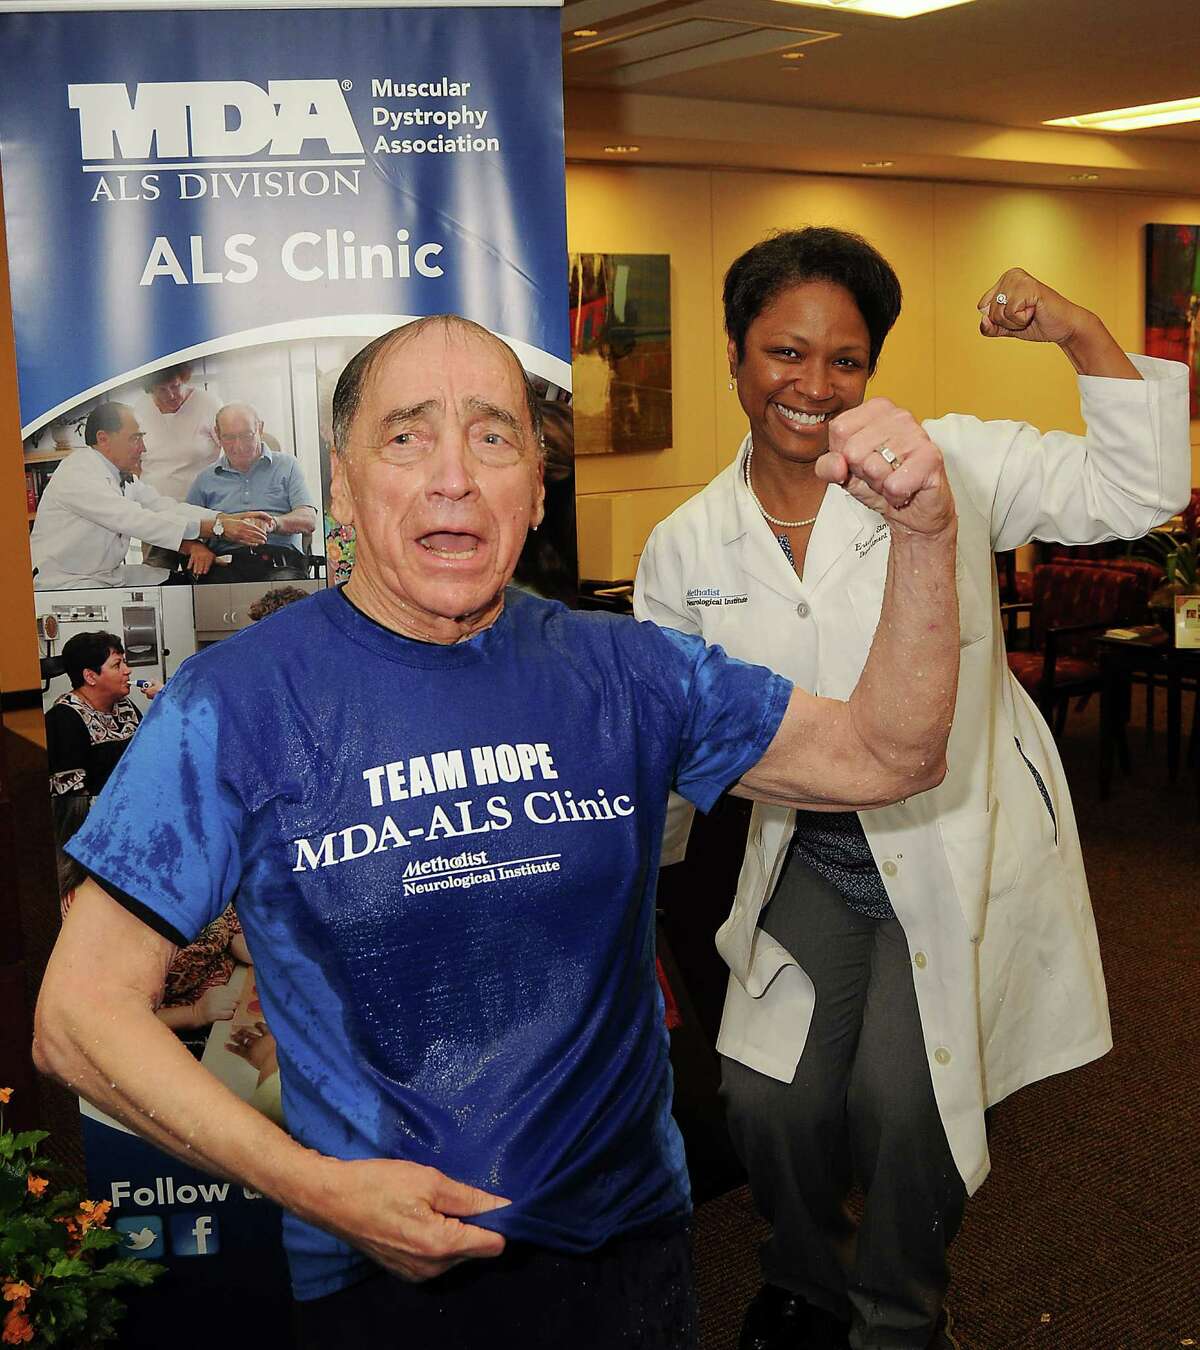 Dr. Stanley Appel and Dr. Ericka Simpson flex after an Ice Bucket Challenge at the Muscular Dystrophy Association ALS Clinic at the Houston Methodist Neurology Institute Monday Aug. 18. Keep clicking to see other people from Houston and Texas who have taken the challenge.